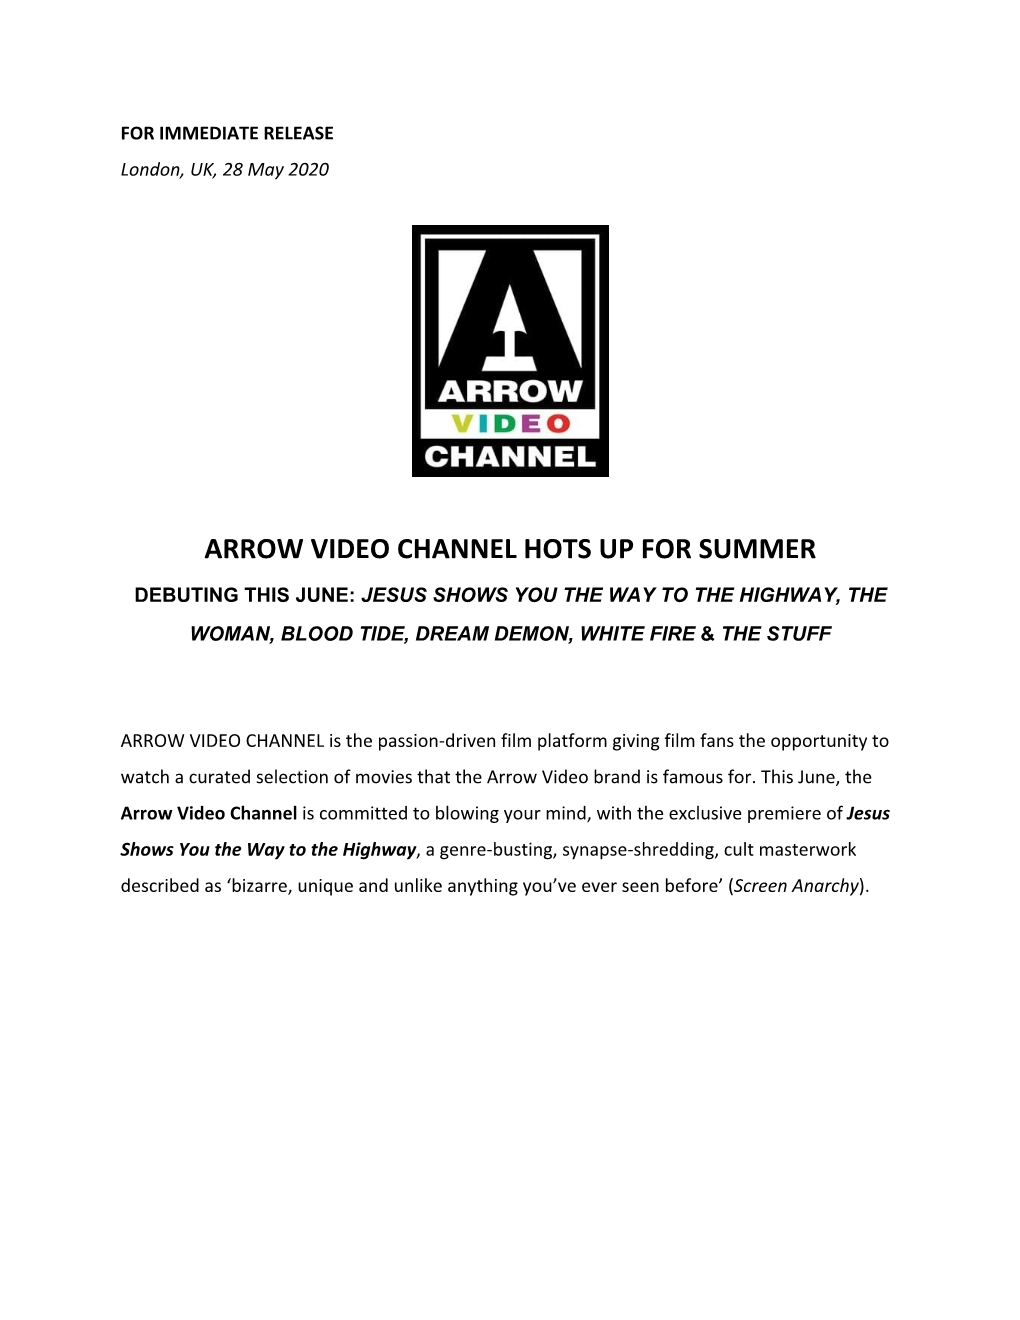 Arrow Video Channel Hots up for Summer